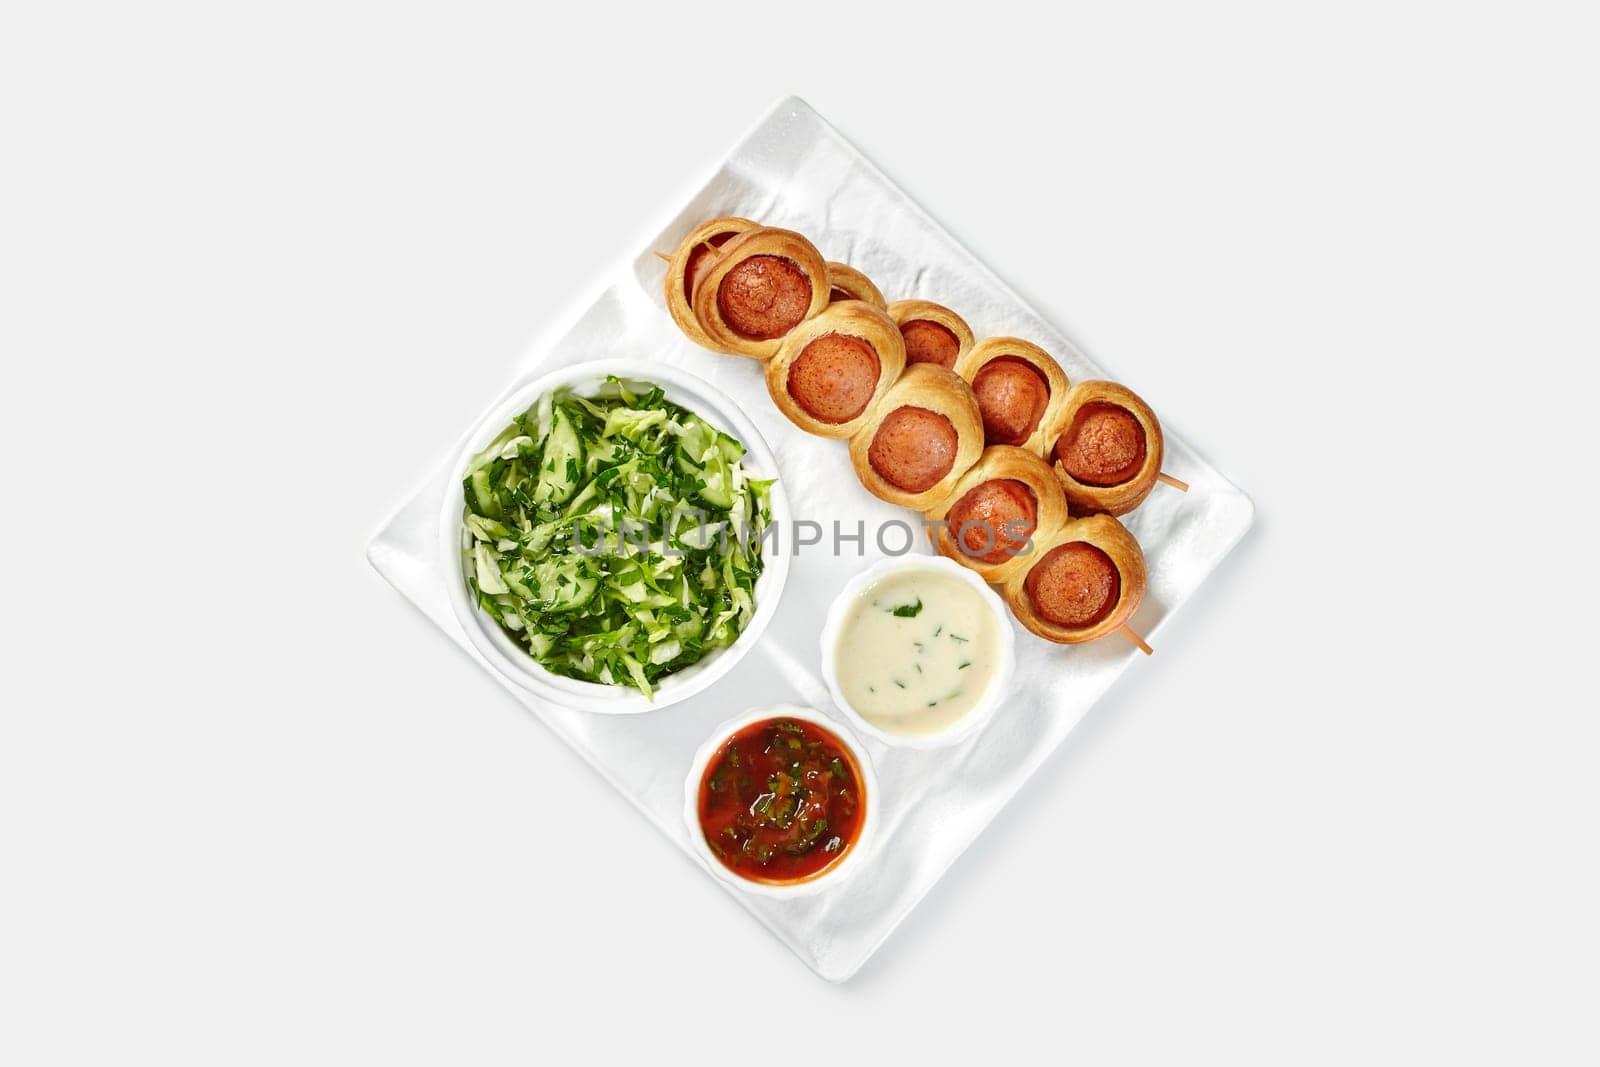 Hearty breakfast set with freshly baked sausage rolls, healthy vegetable crisp salad, and spicy dipping sauces on tray against white backdrop